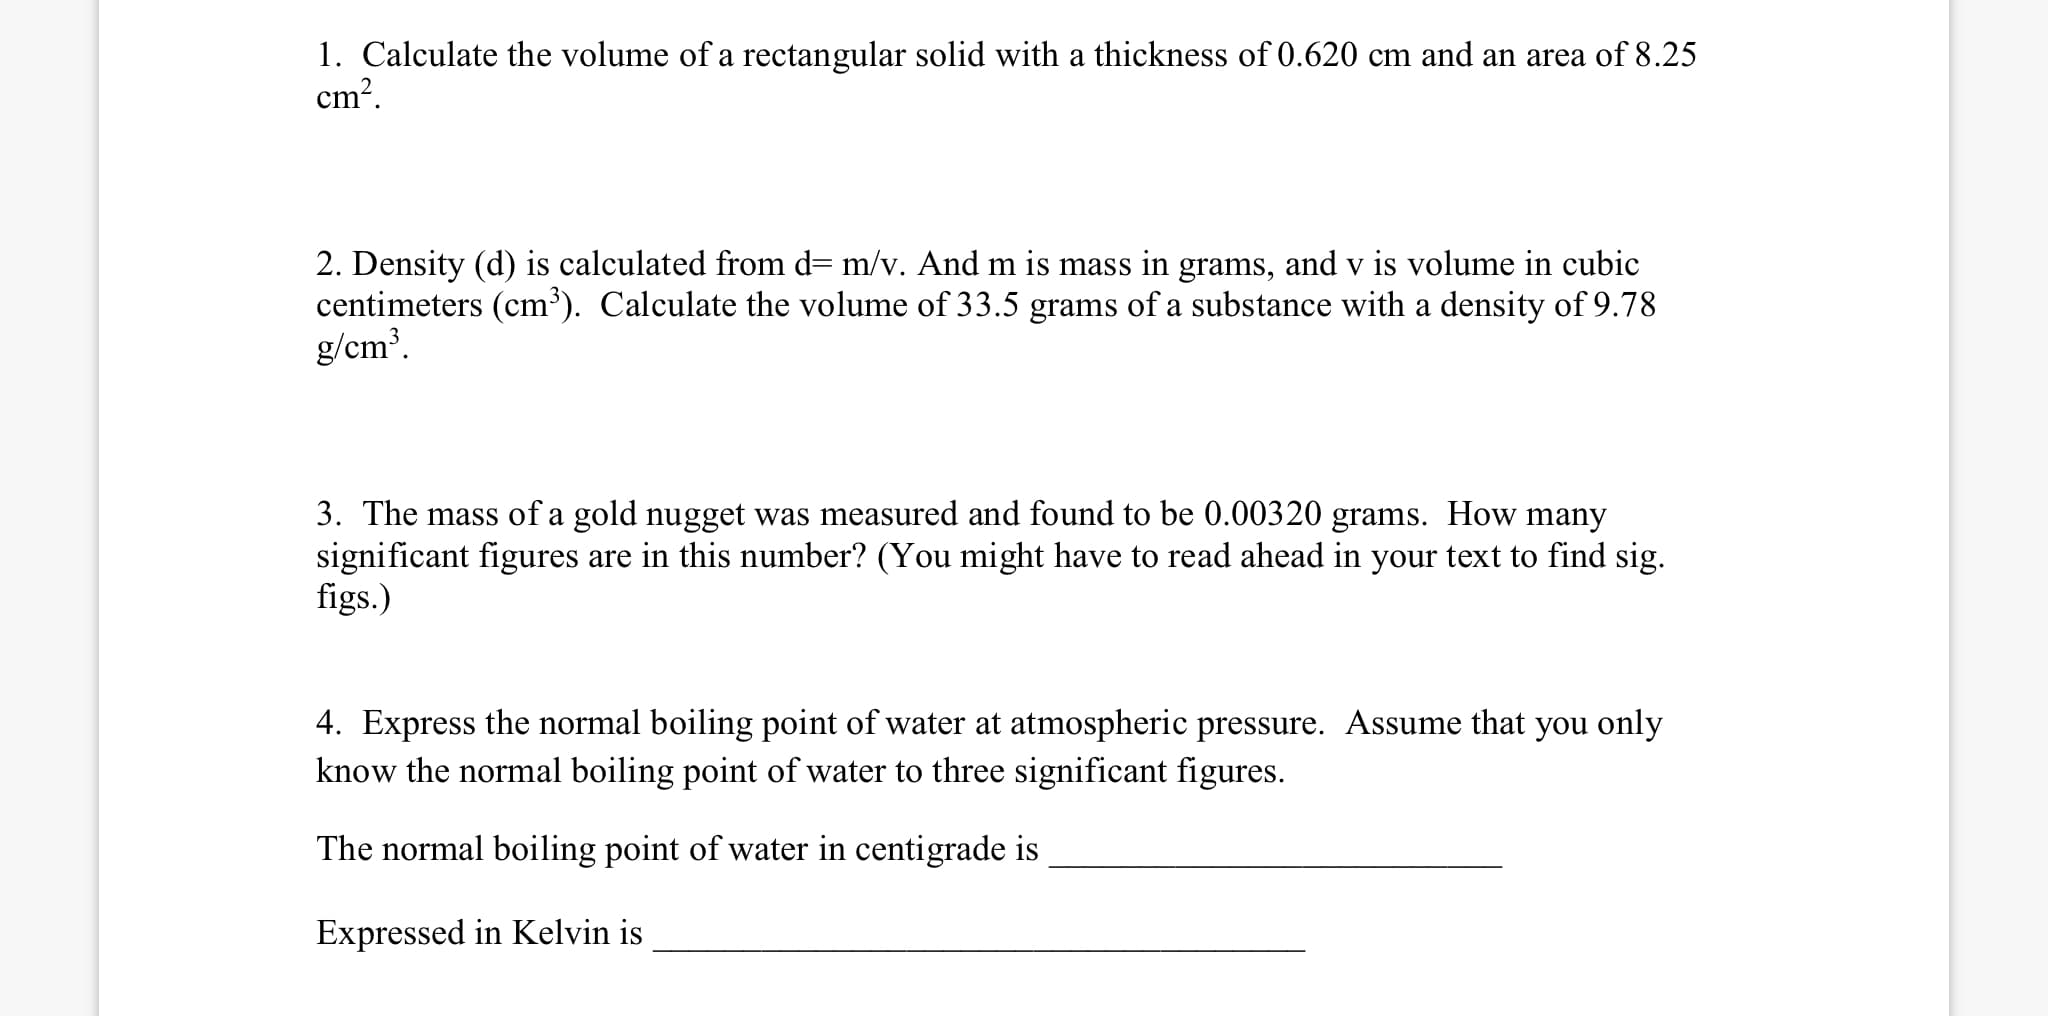 1. Calculate the volume of a rectangular solid with a thickness of 0.620 cm and an area of 8.25
cm?.
2. Density (d) is calculated from d= m/v. And m is mass in grams, and v is volume in cubic
centimeters (cm³). Calculate the volume of 33.5 grams of a substance with a density of 9.78
g/cm³.
3. The mass of a gold nugget was measured and found to be 0.00320 grams. How many
significant figures are in this number? (You might have to read ahead in your text to find sig.
figs.)
4. Express the normal boiling point of water at atmospheric pressure. Assume that you only
know the normal boiling point of water to three significant figures.
The normal boiling point of water in centigrade is
Expressed in Kelvin is
